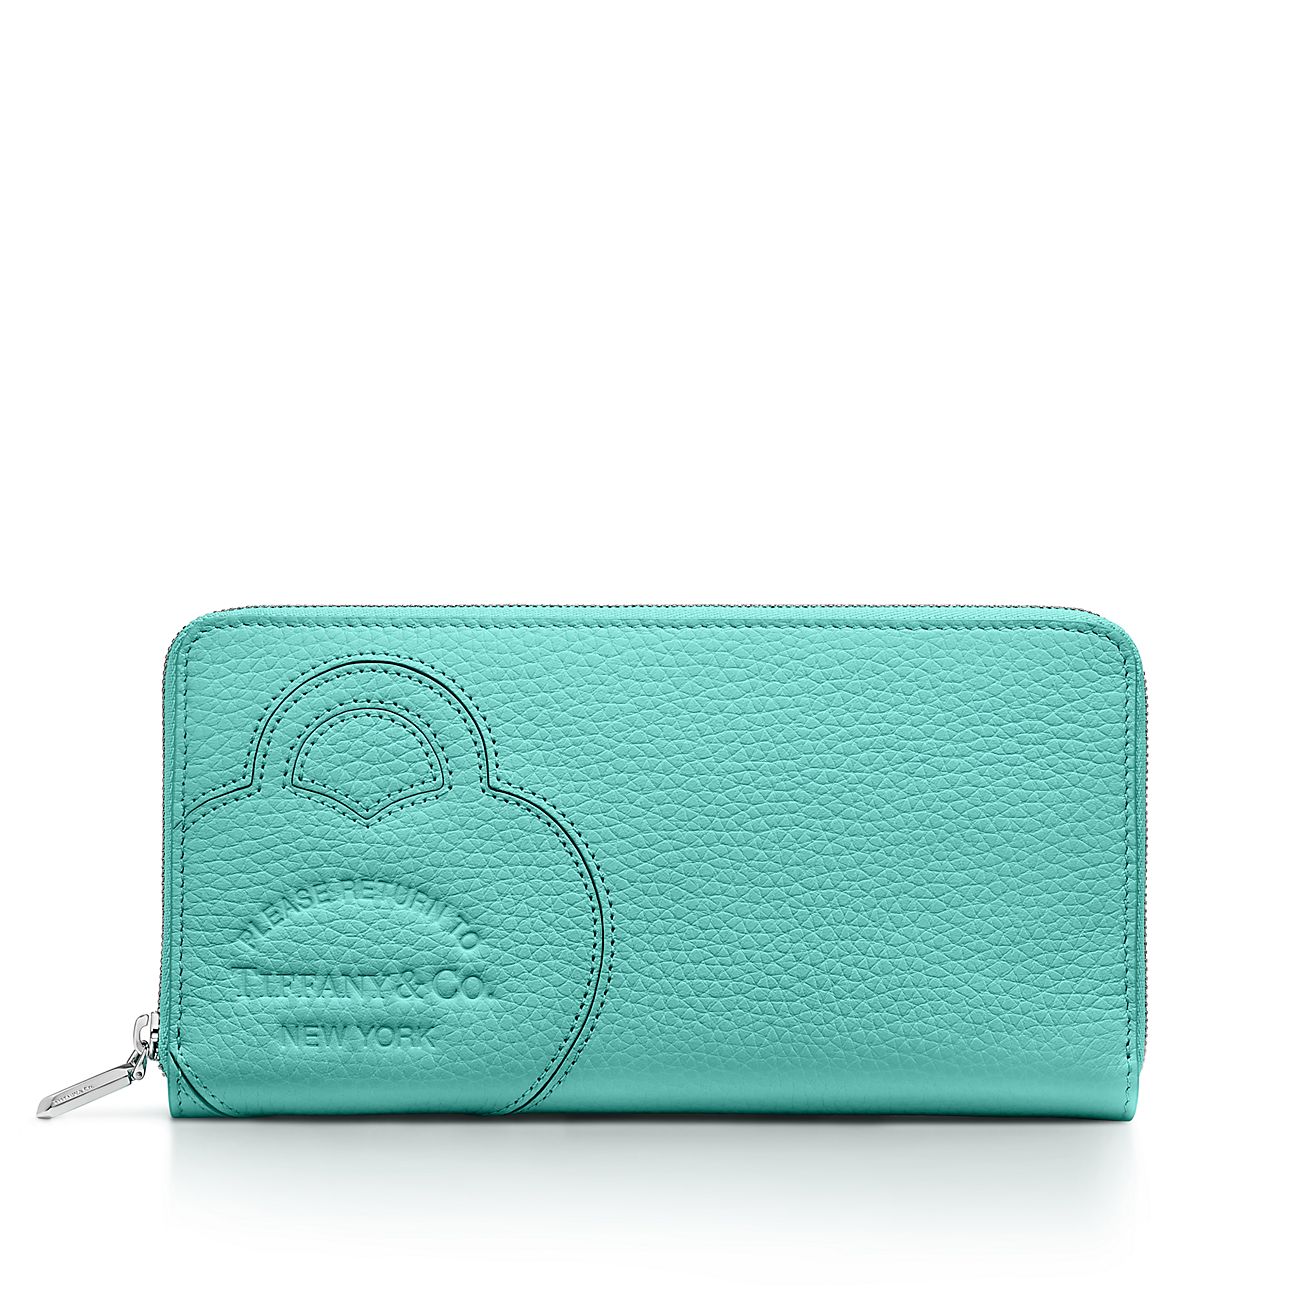 Return to Tiffany® Large Zip Wallet in Tiffany Blue® Leather | Tiffany & Co.